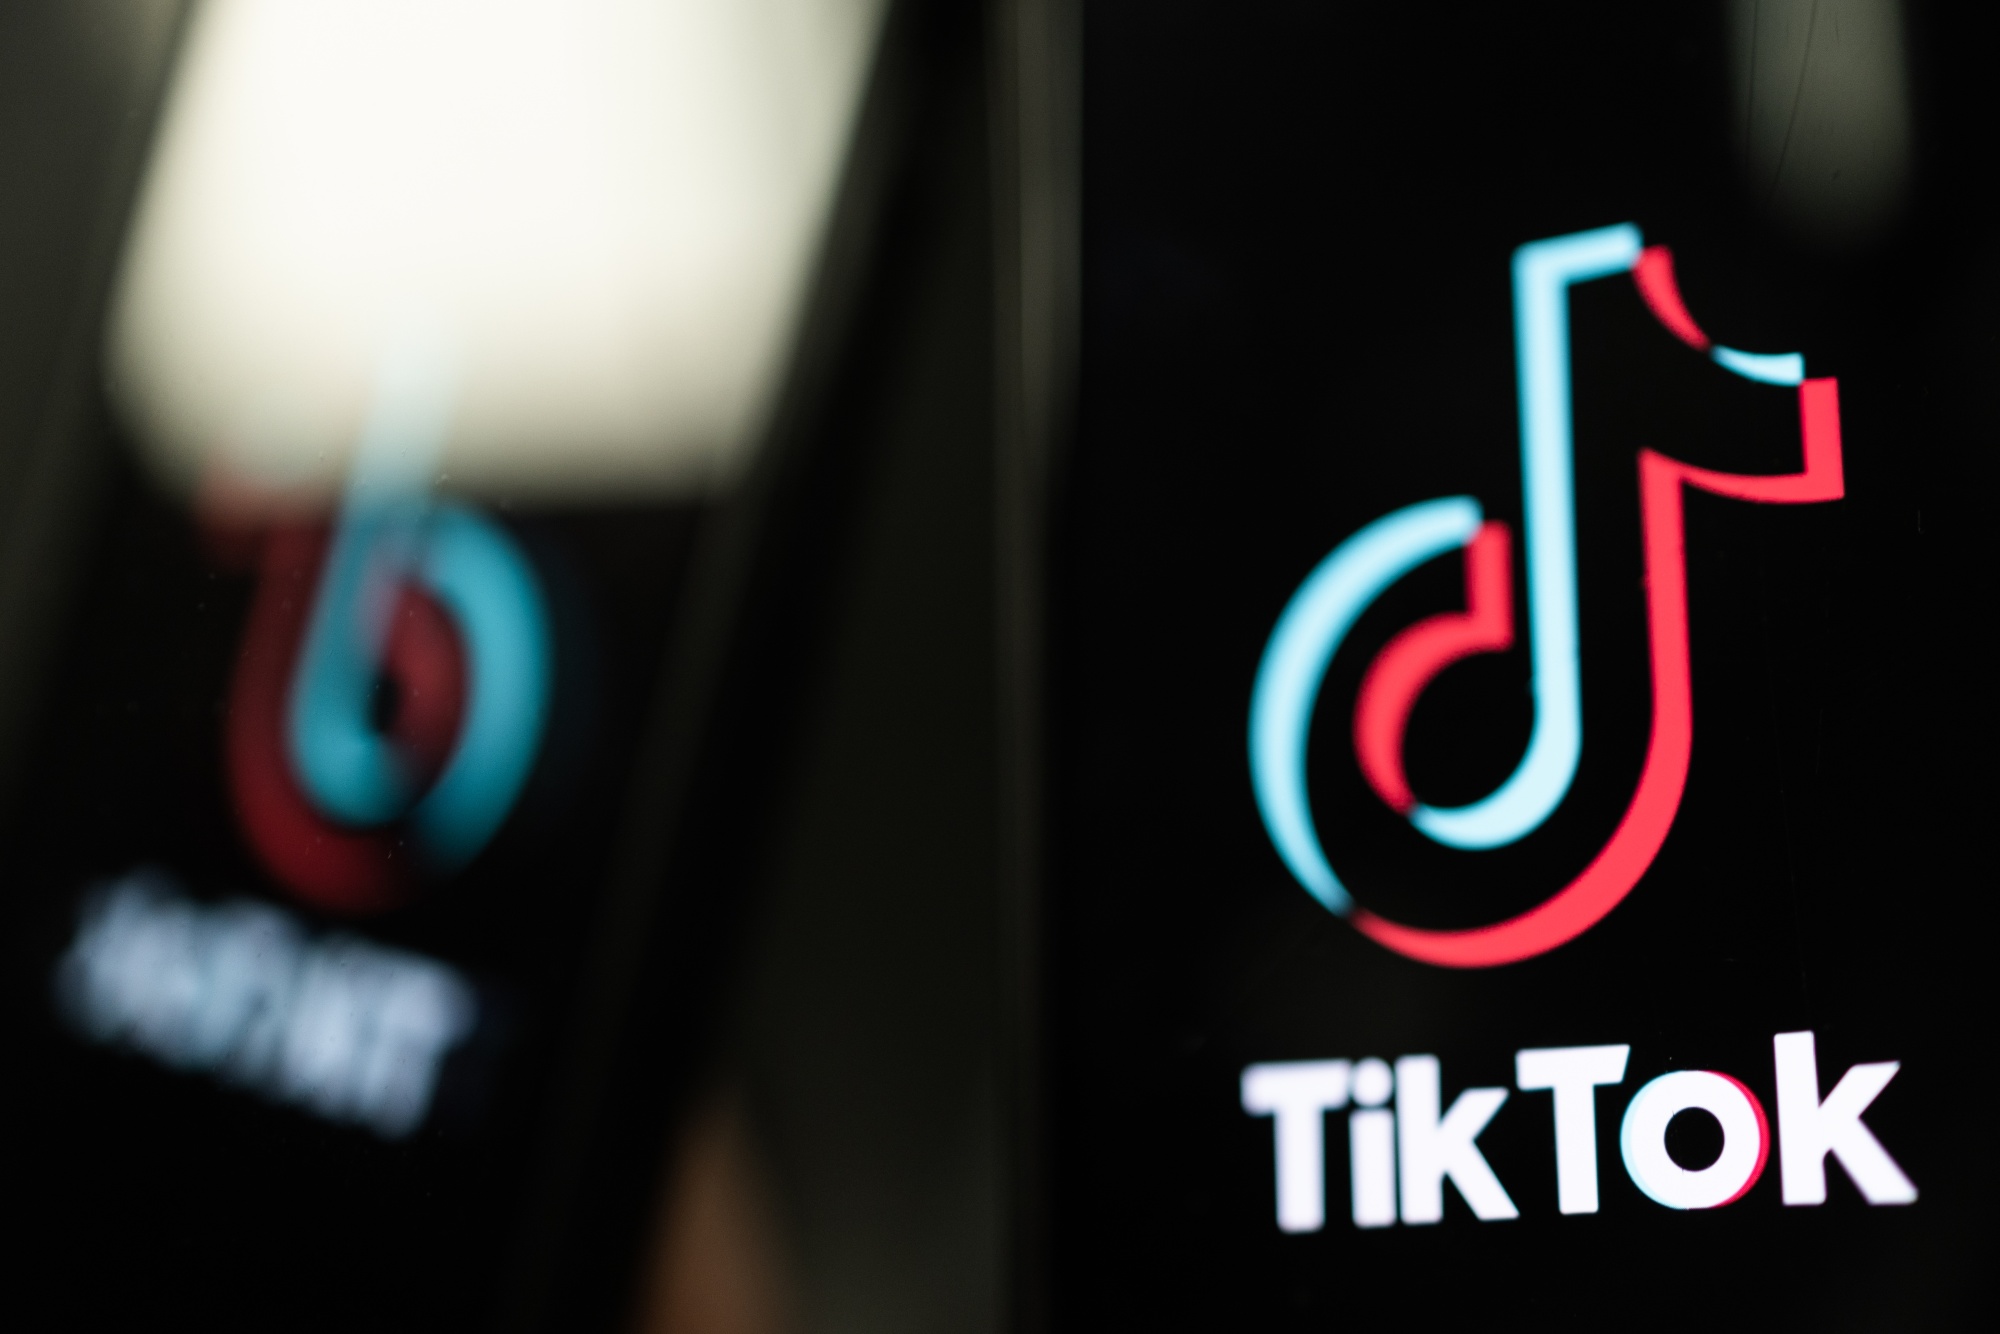 The U.S. Government Banned TikTok From Federal Devices. What's